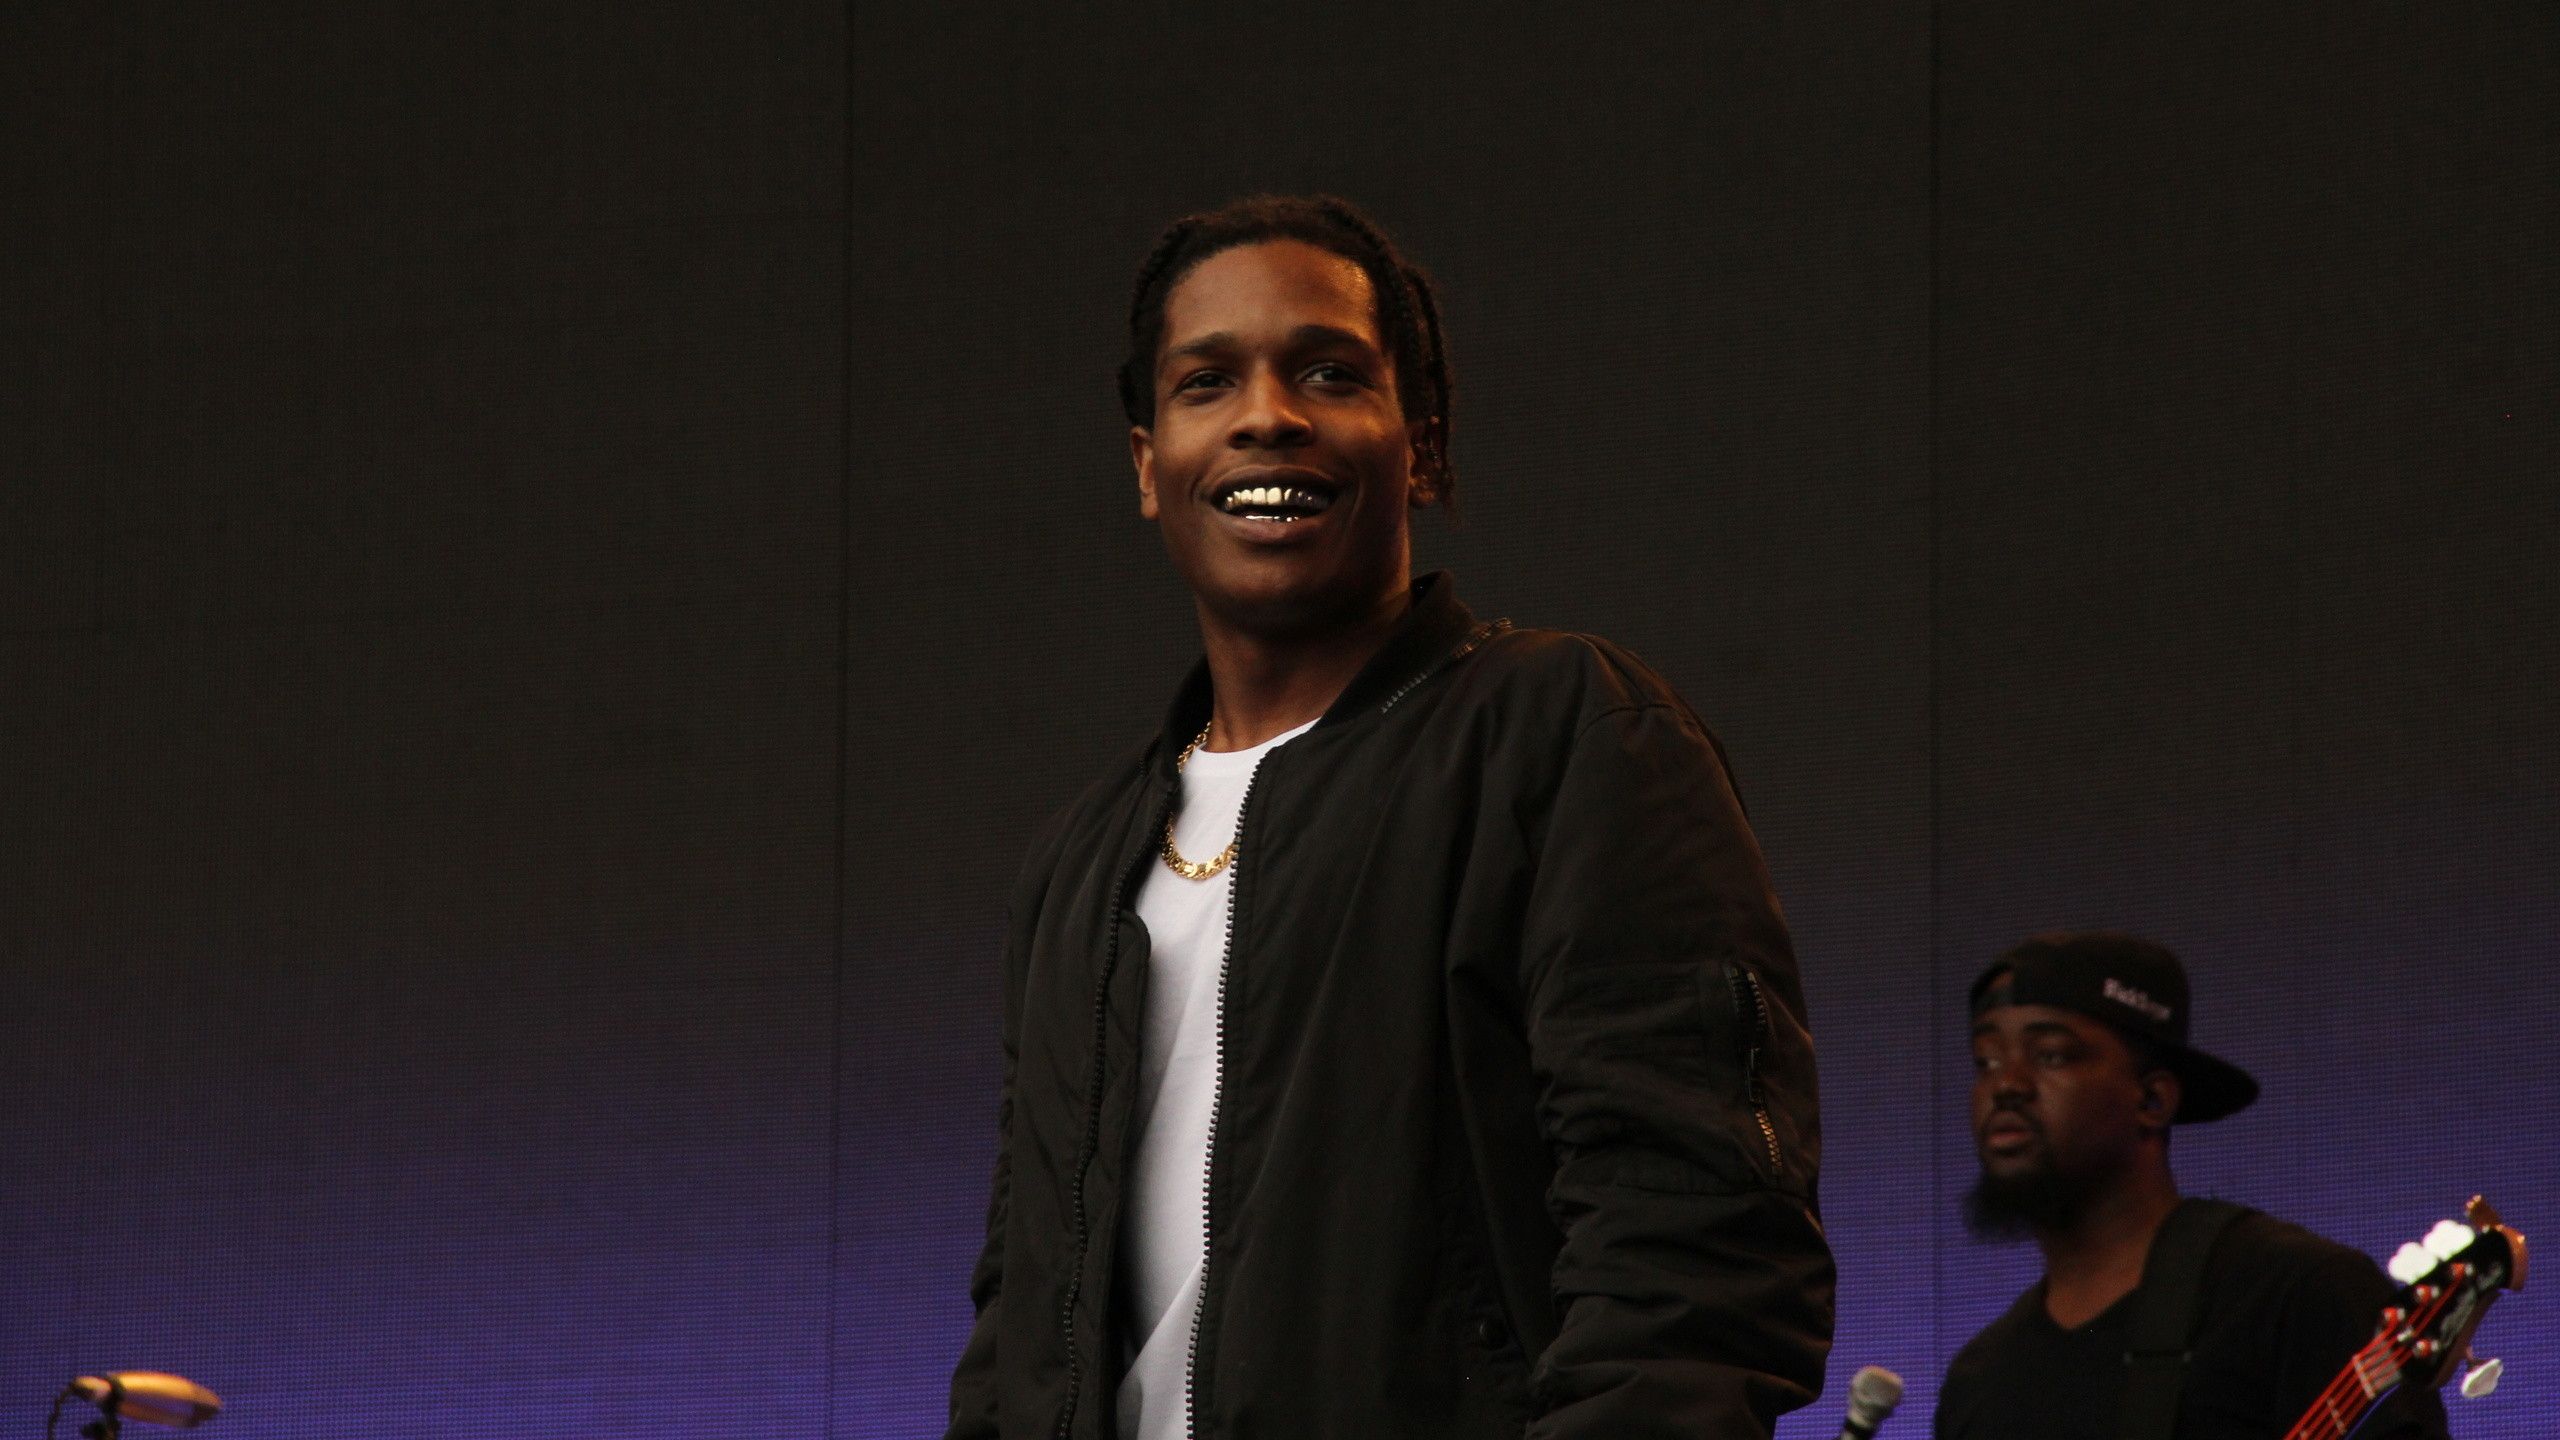 Asap Rocky Wallpaper For iPhone Rocky Laptop Background